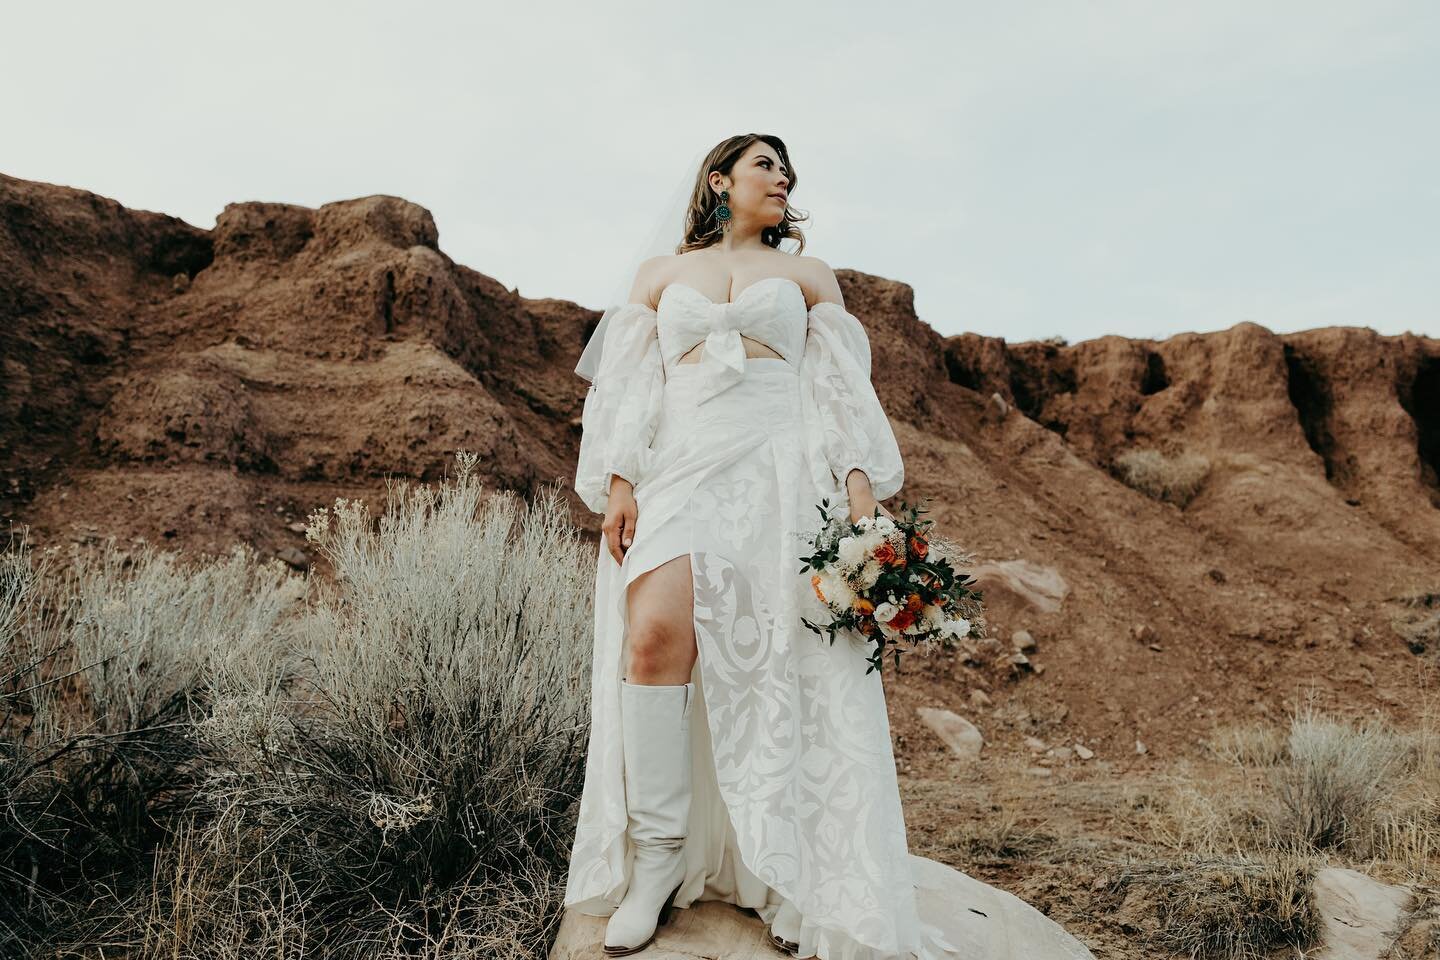 Looking like a babe in boots on her wedding day!